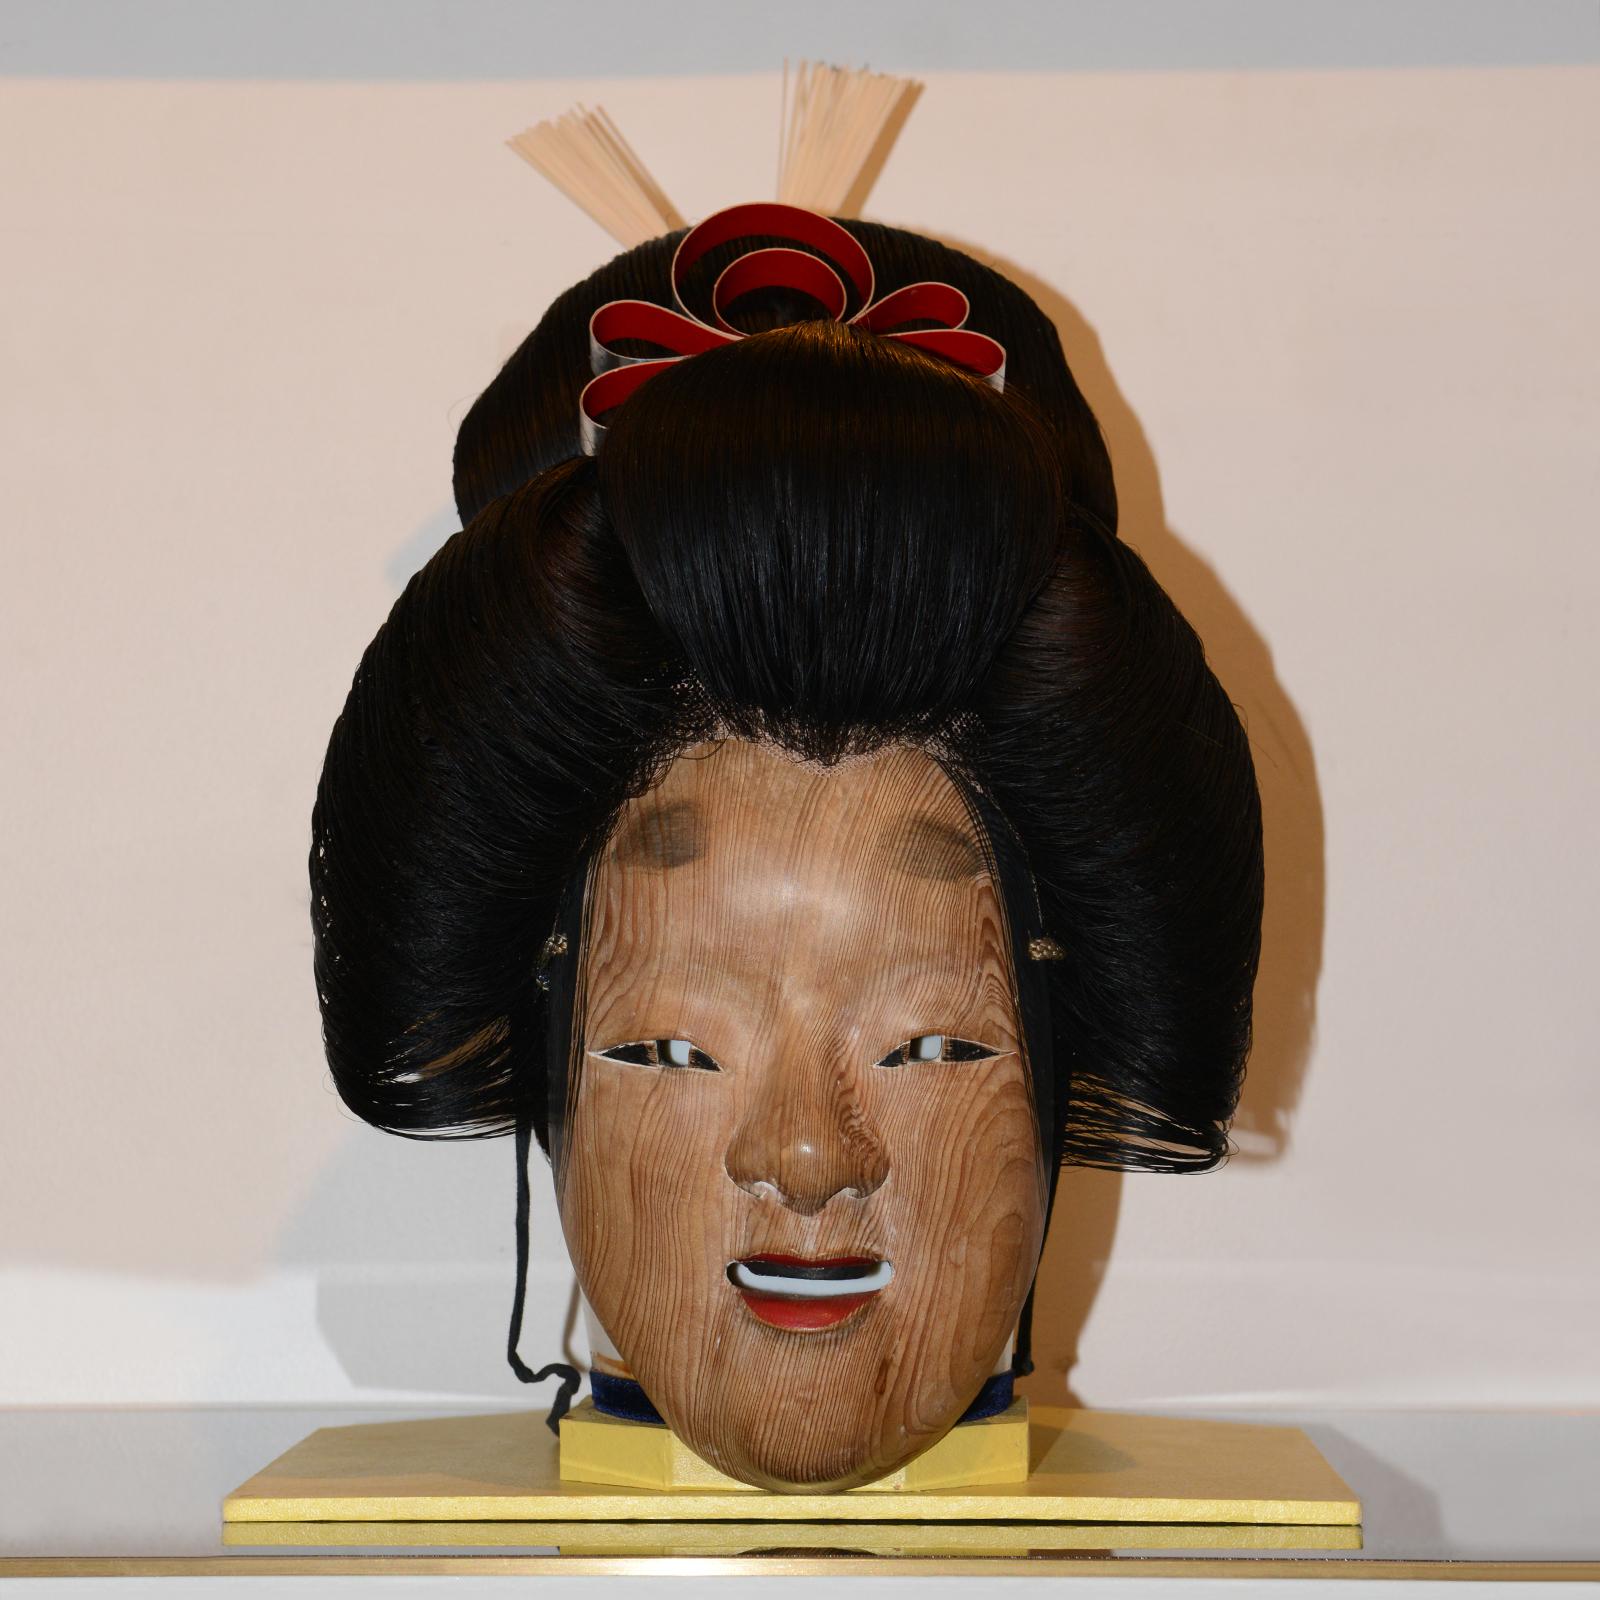 Mask Geisha Wig & Nô Theater 2, with real natural hair Geisha wig
on head model and with Nô Theater natural wood mask.
Base: 28,5x26,3cm.